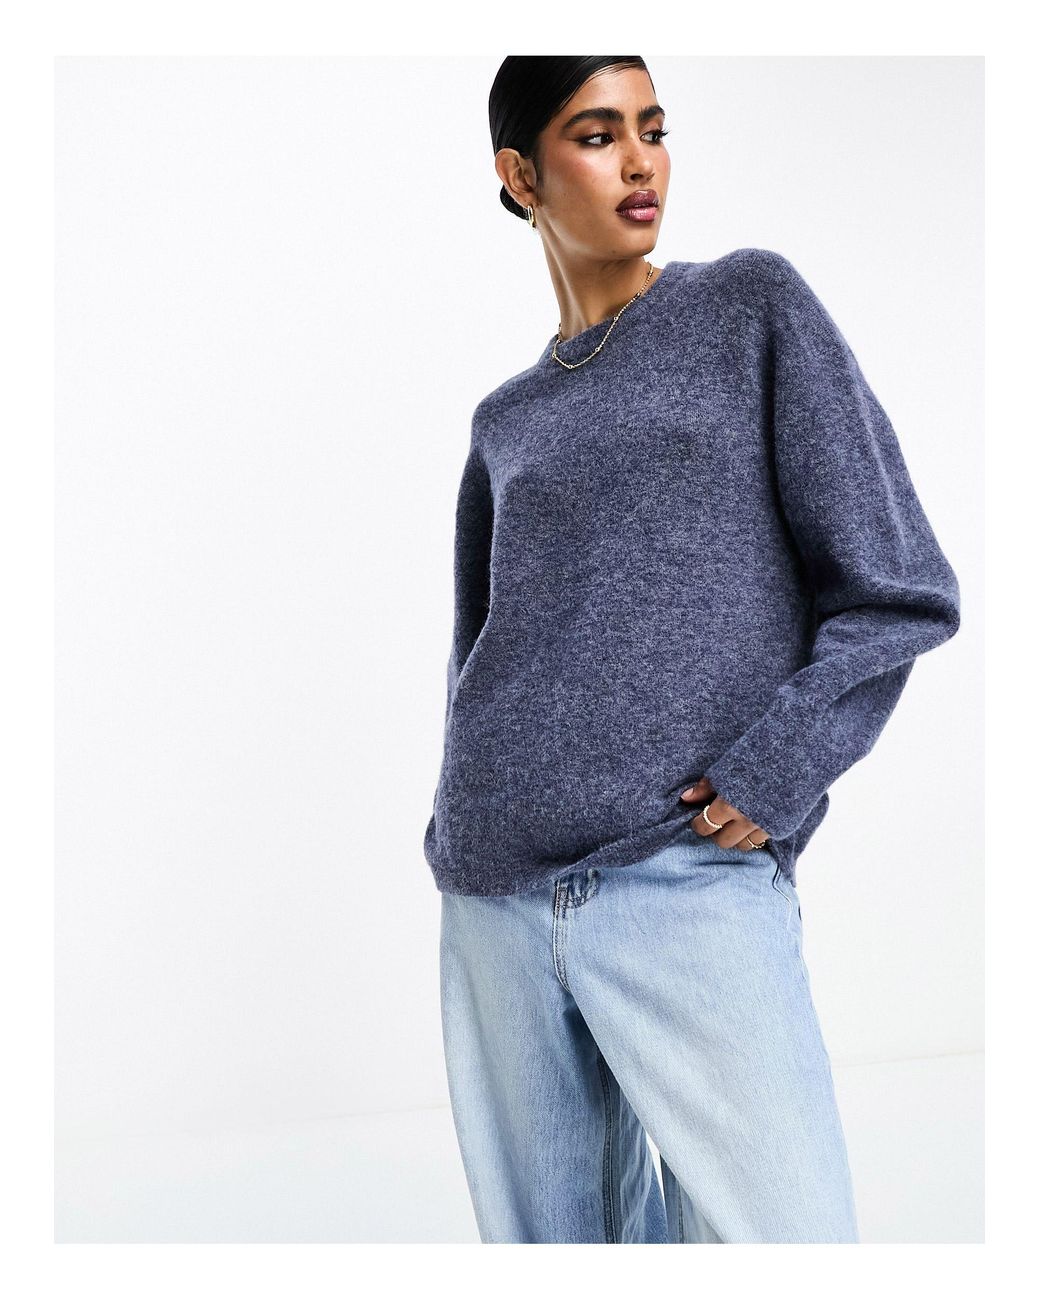 & Other Stories Alpaca Wool Relaxed Jumper in Blue | Lyst Australia